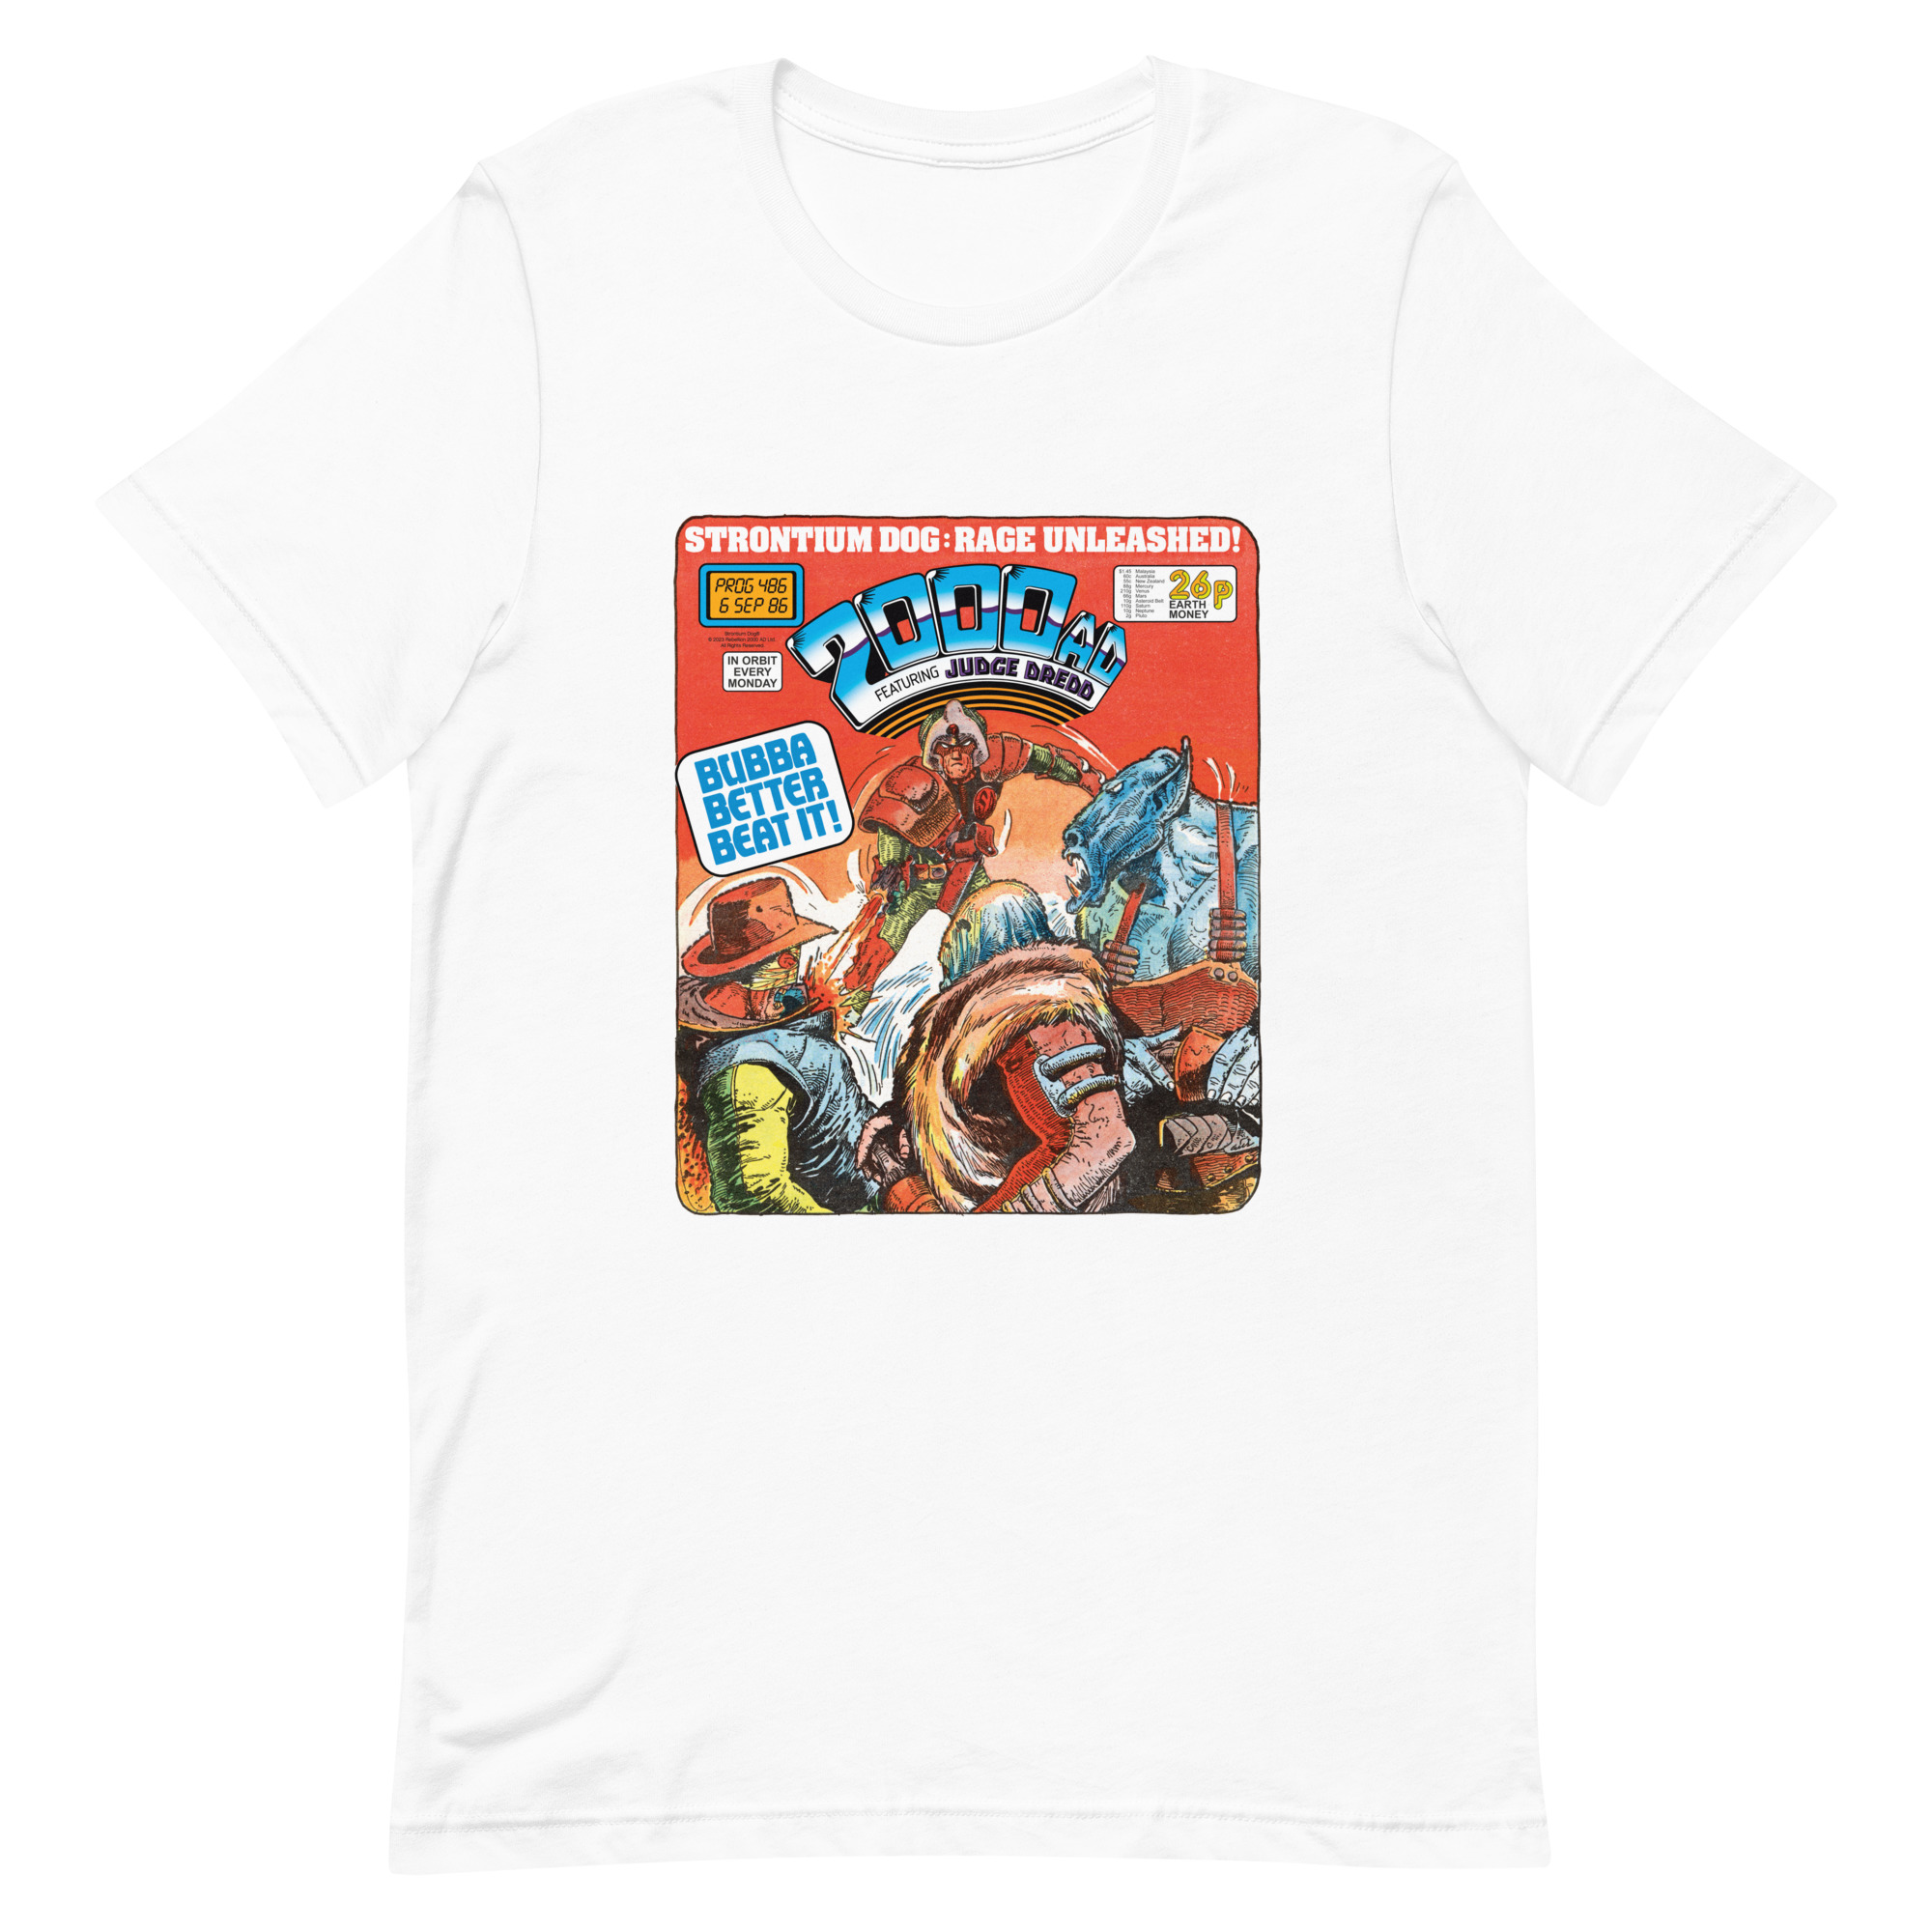 White Tshirt with a 'Classic' 2000 AD Cover image on the chest. In the image Strontium Dog faces off against three alien ruffians.